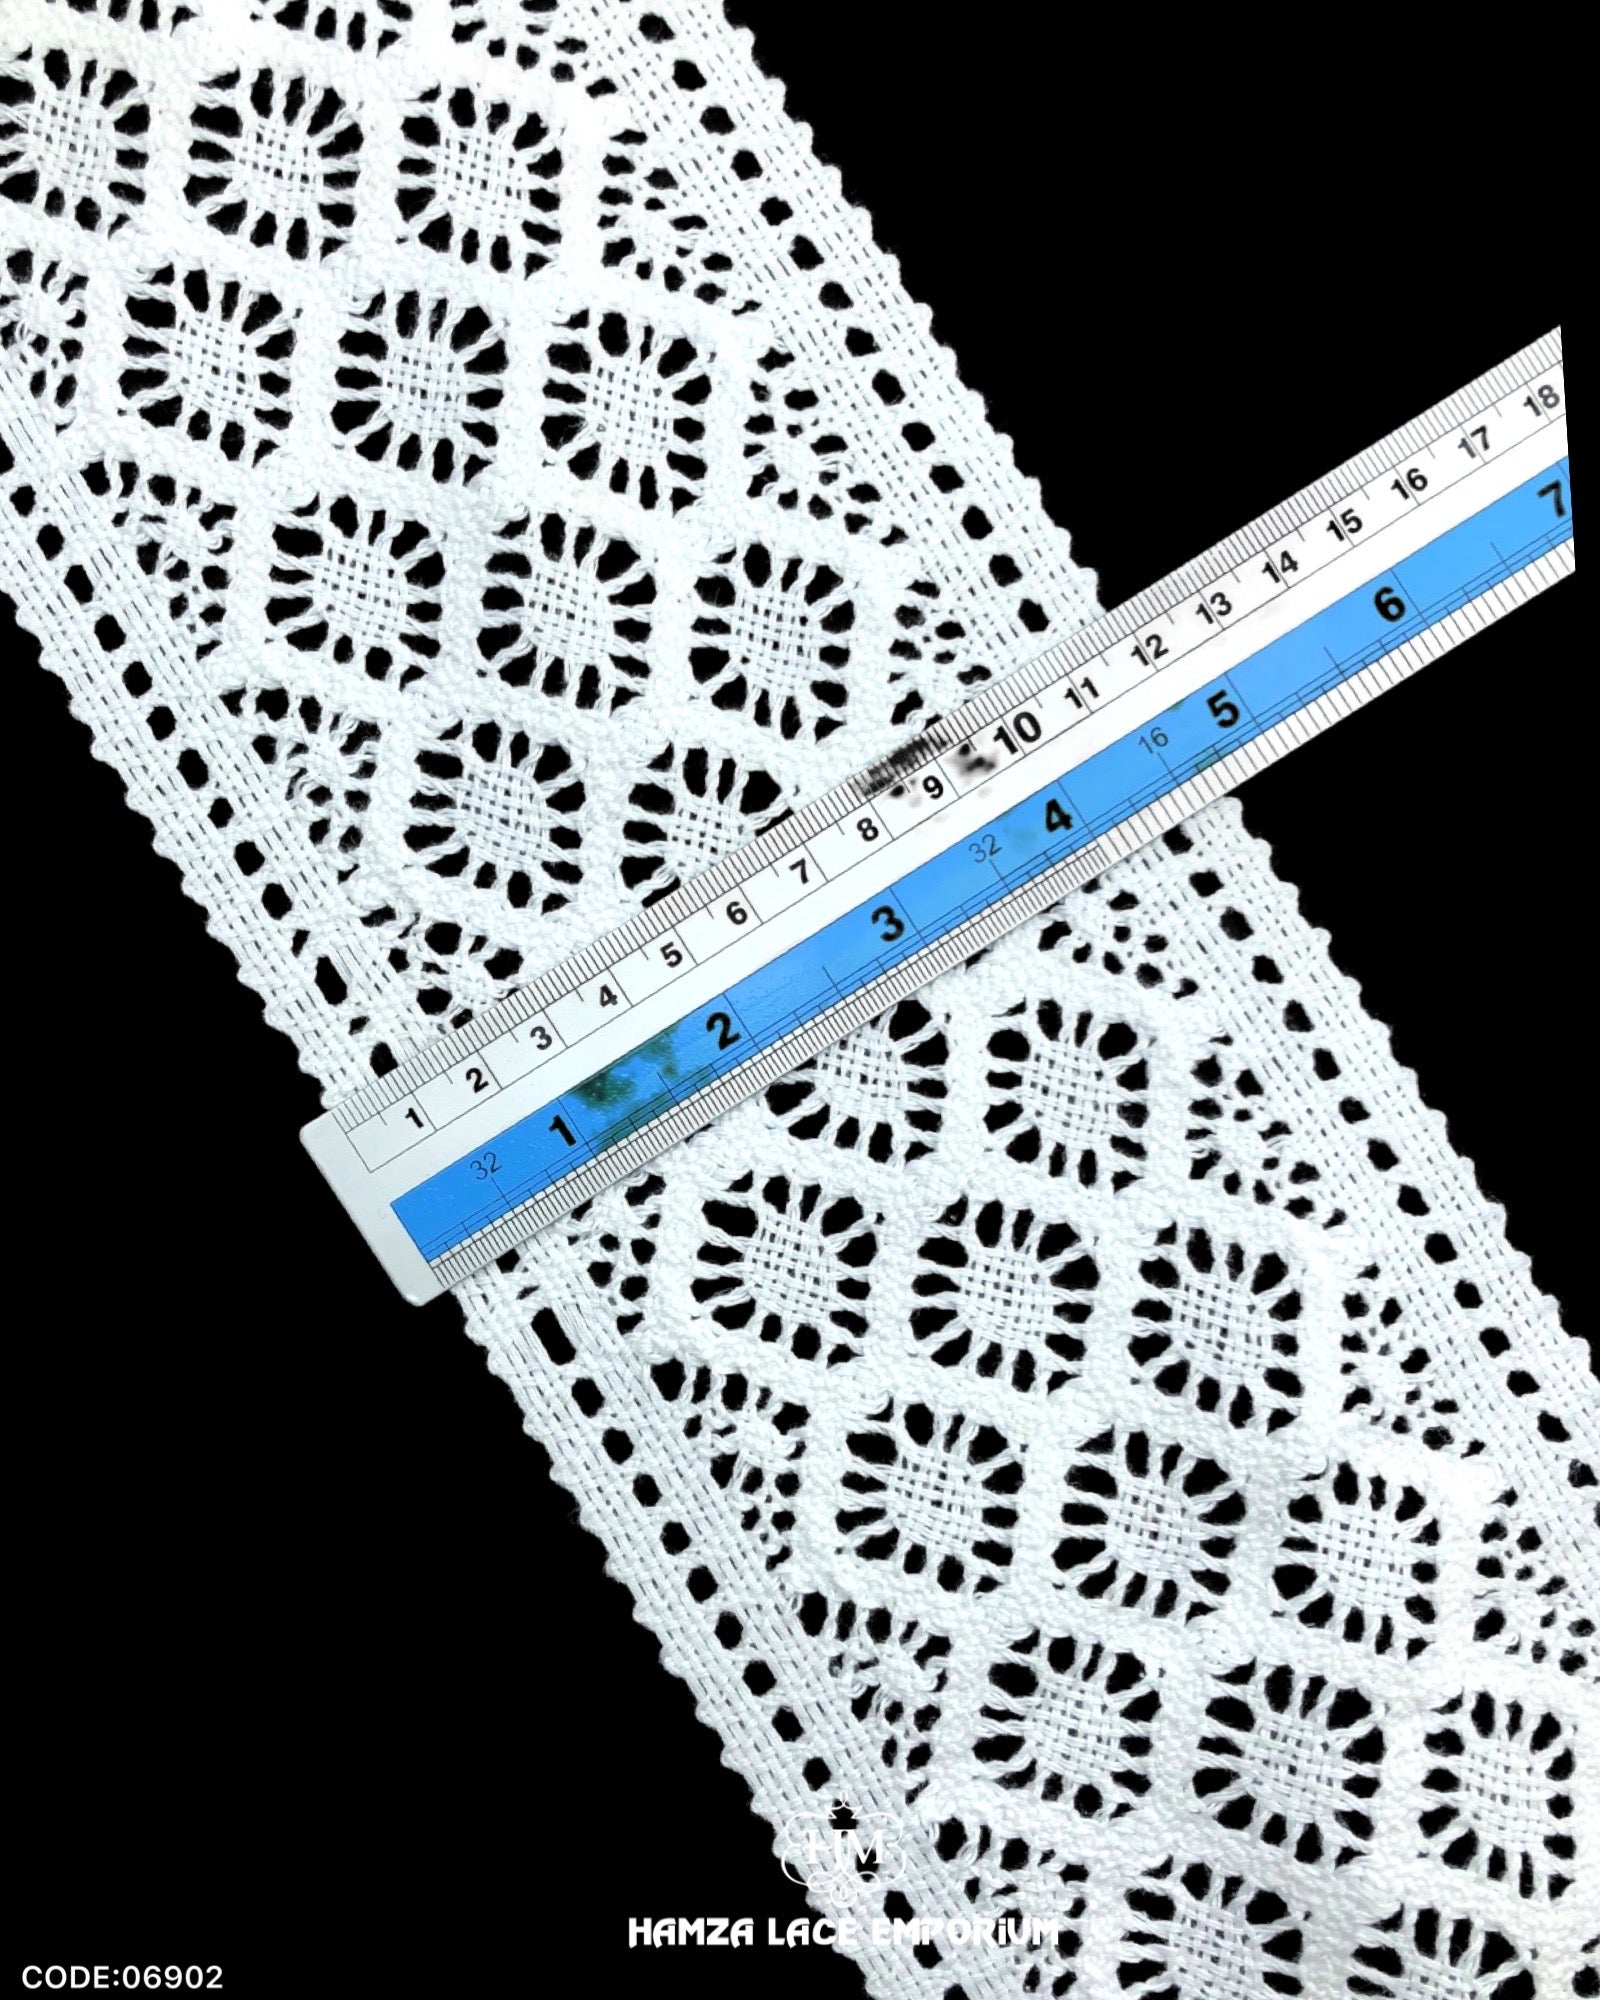 Size of the 'Center Filling Crochet Lace 06902' is shown with the help of a ruler as '3' inches